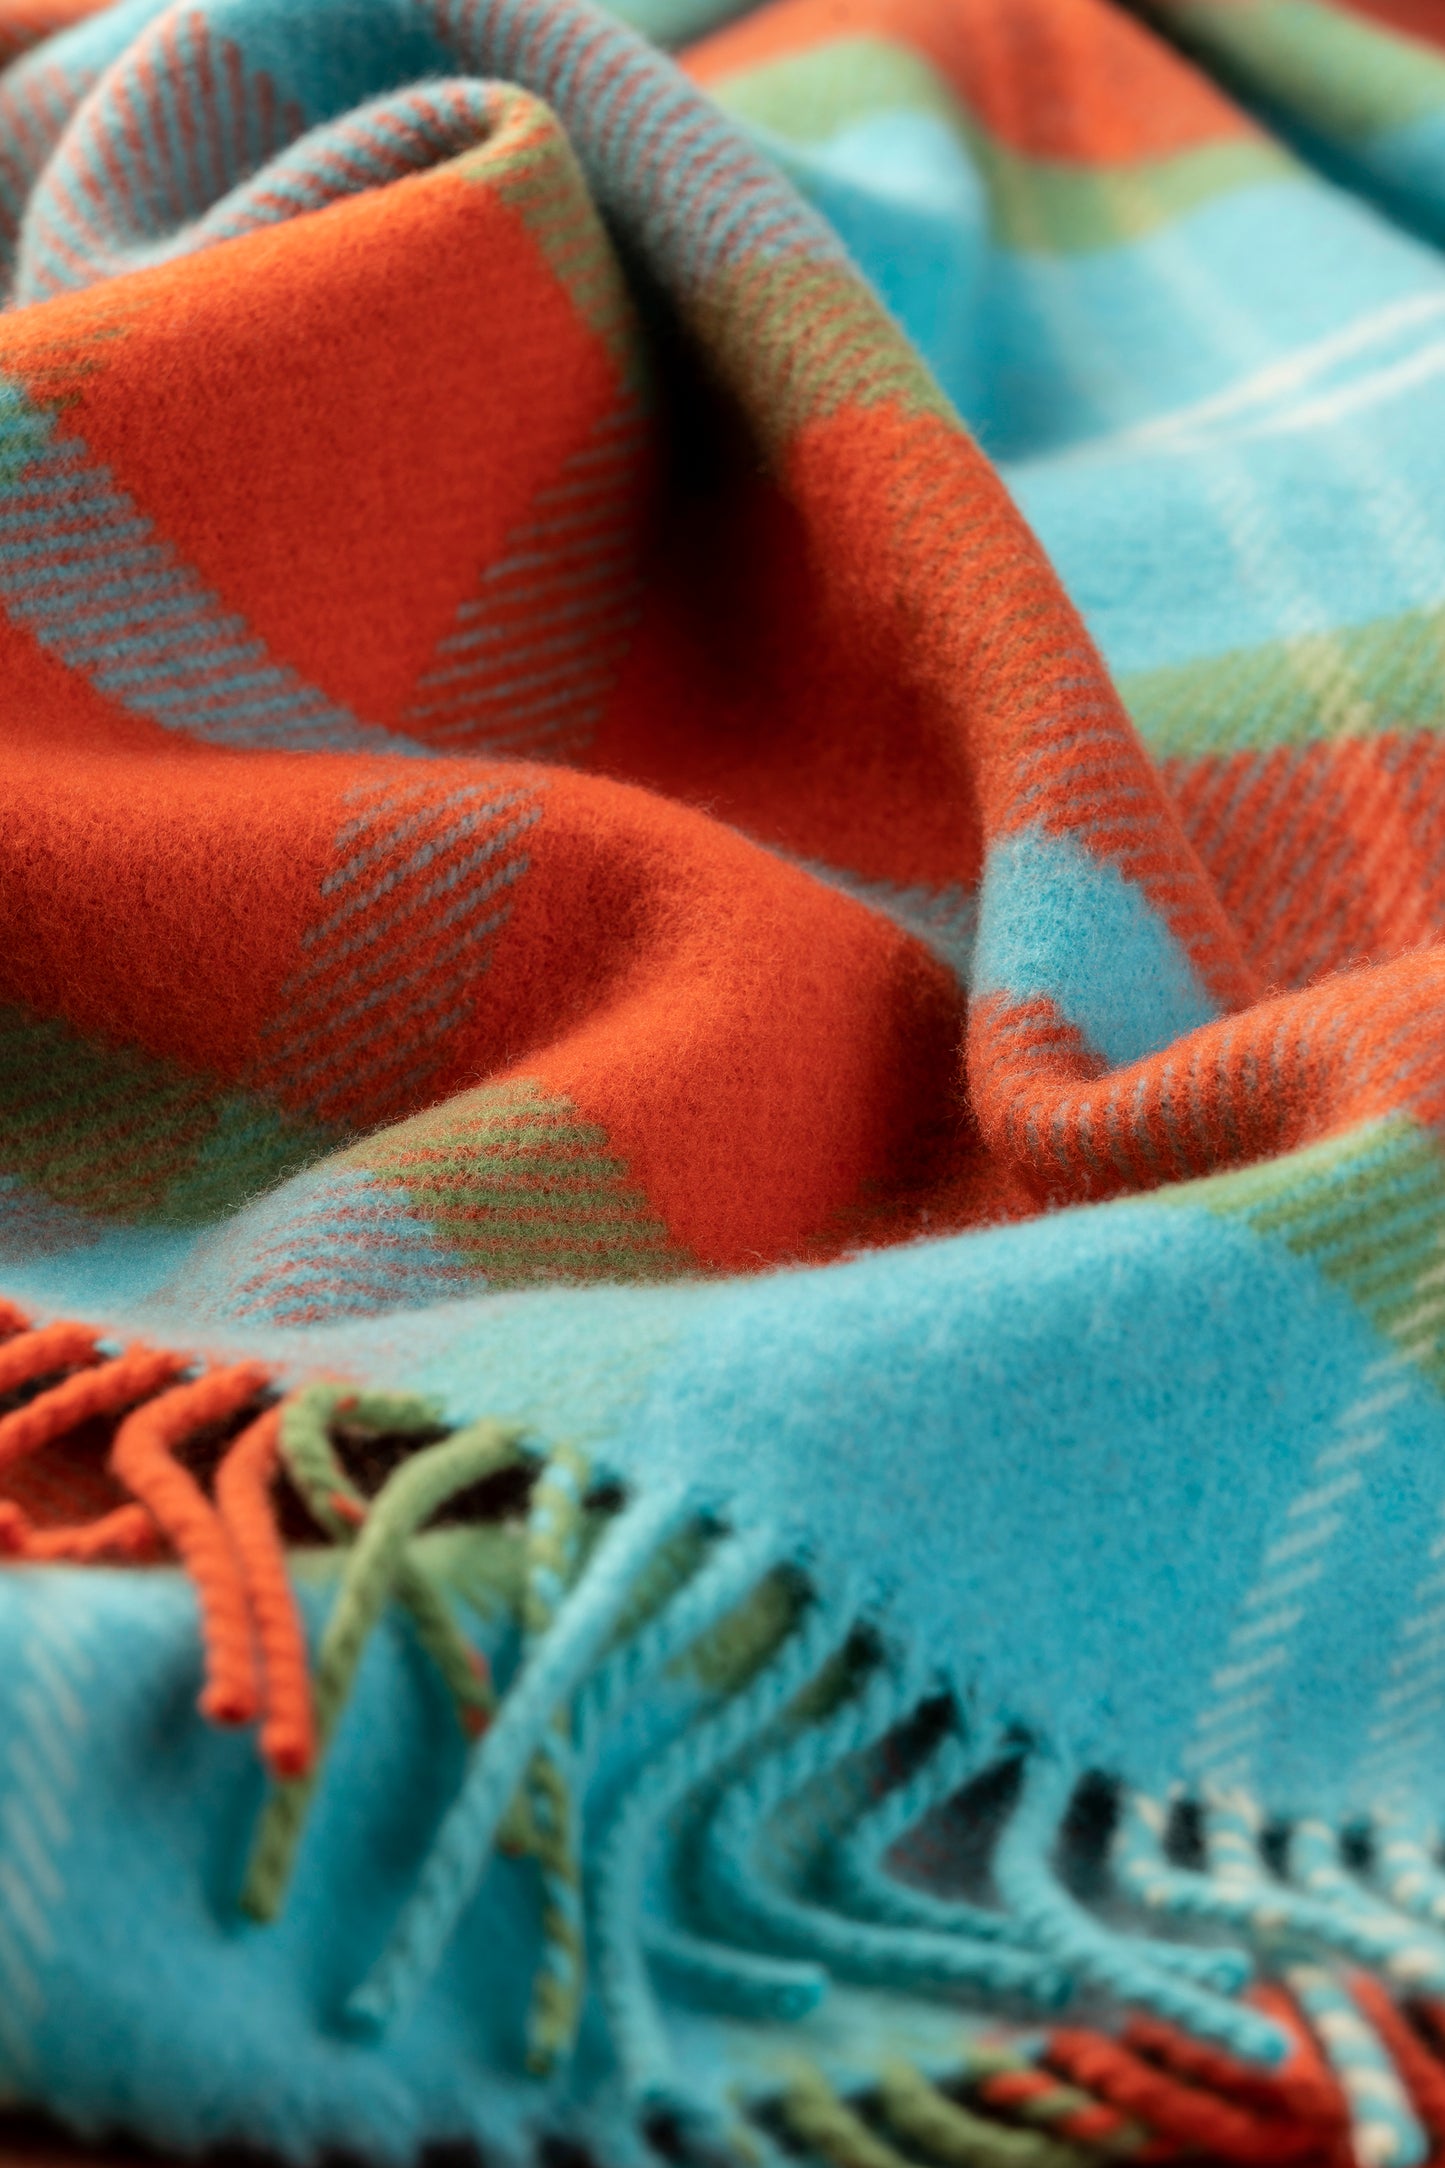 Limited Edition Large Check Throw - Turquoise